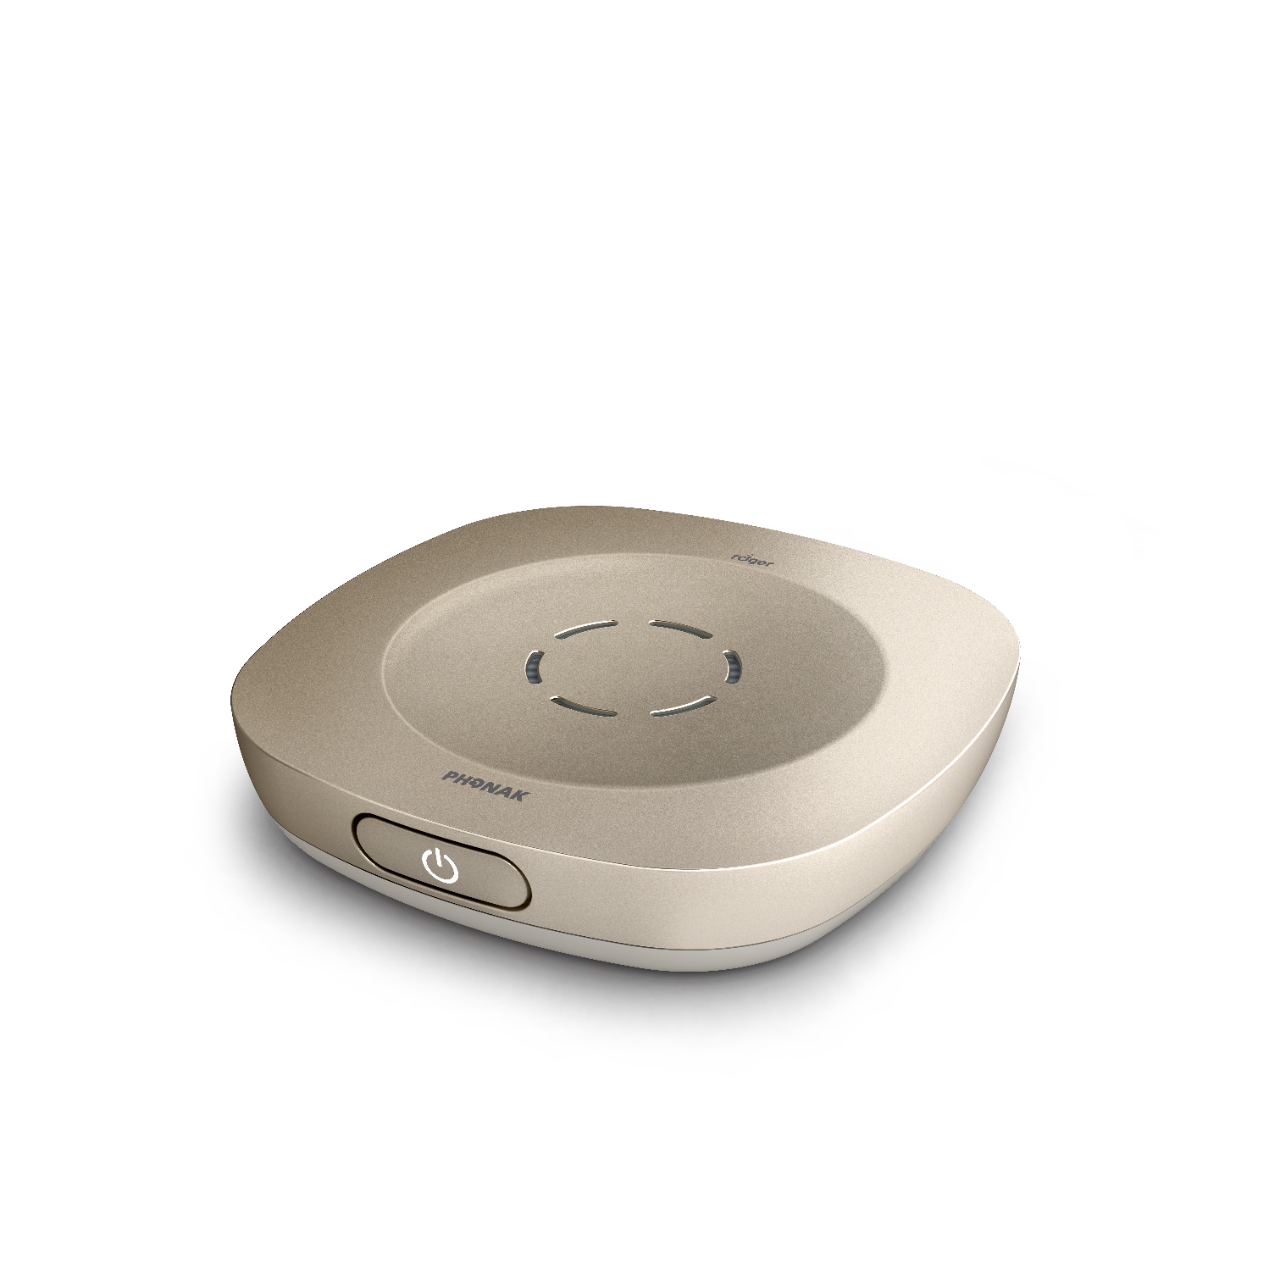 Image of Roger Table Mic accessory for Relate hearing aid.